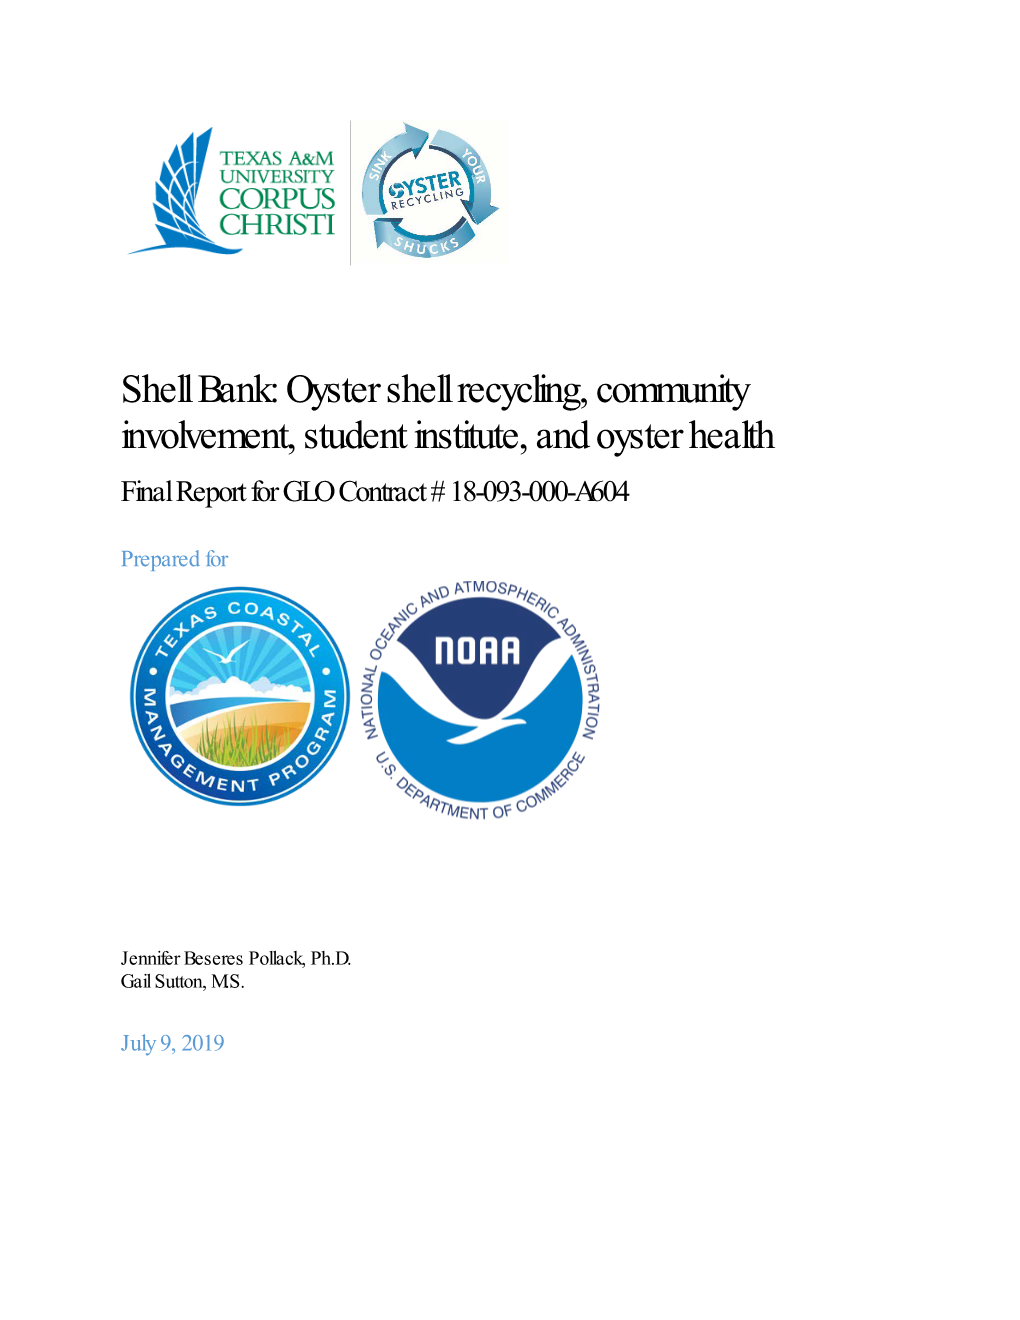 Shell Bank: Oyster Shell Recycling, Community Involvement, Student Institute, and Oyster Health Final Report for GLO Contract # 18-093-000-A604